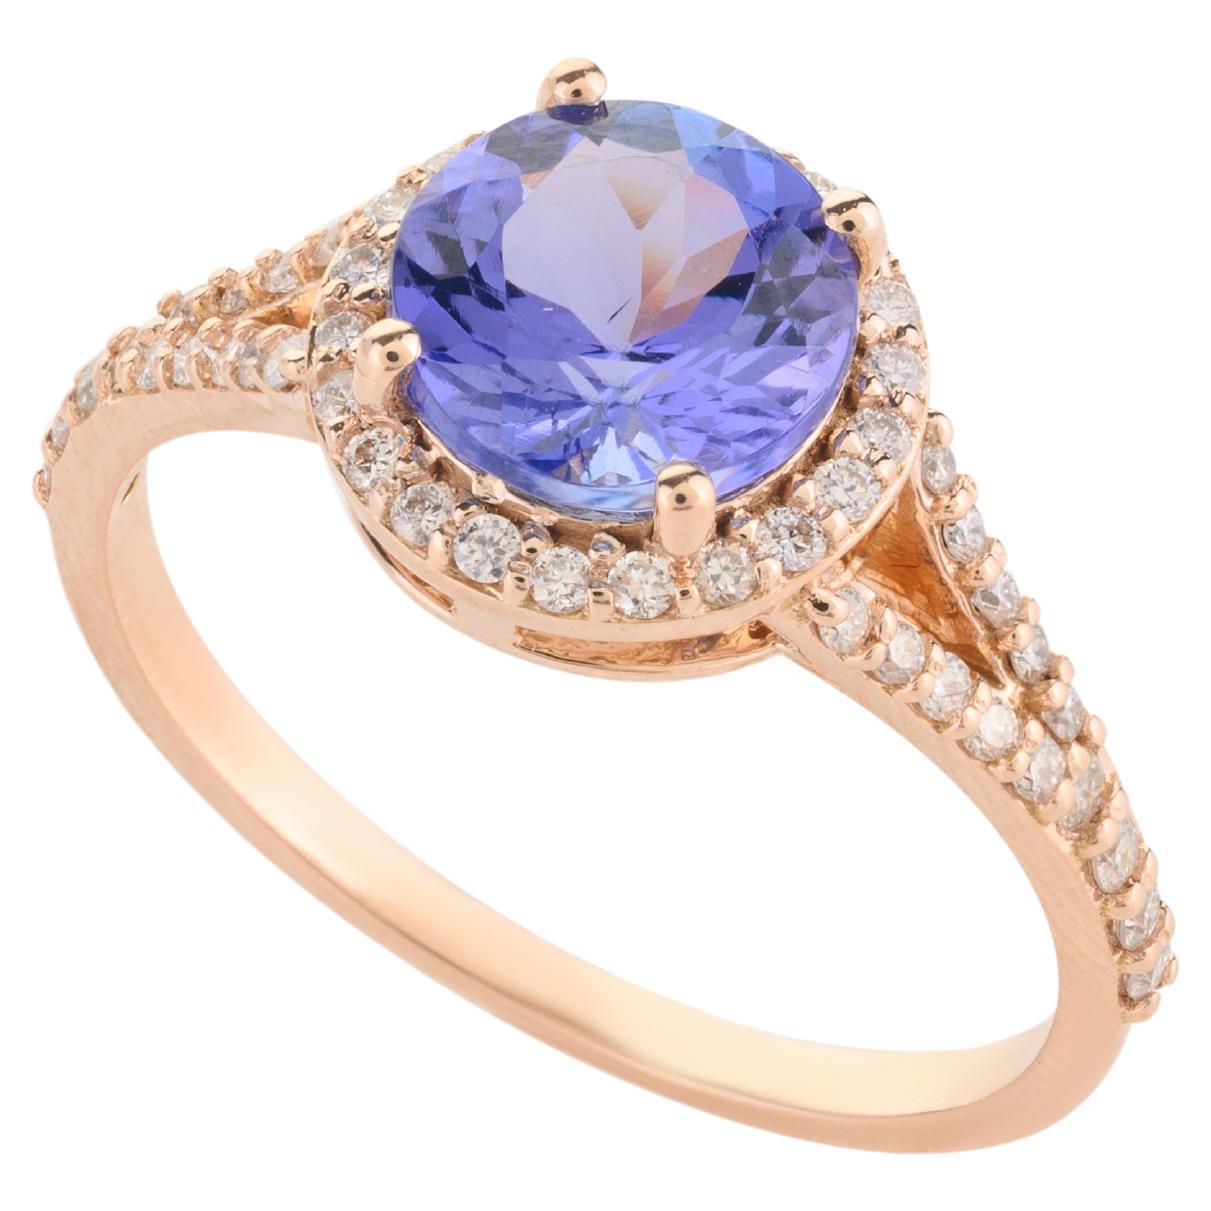 For Sale:  18k Solid Rose Gold Brilliant 1.47 CTW Tanzanite and Diamond Engagement Ring